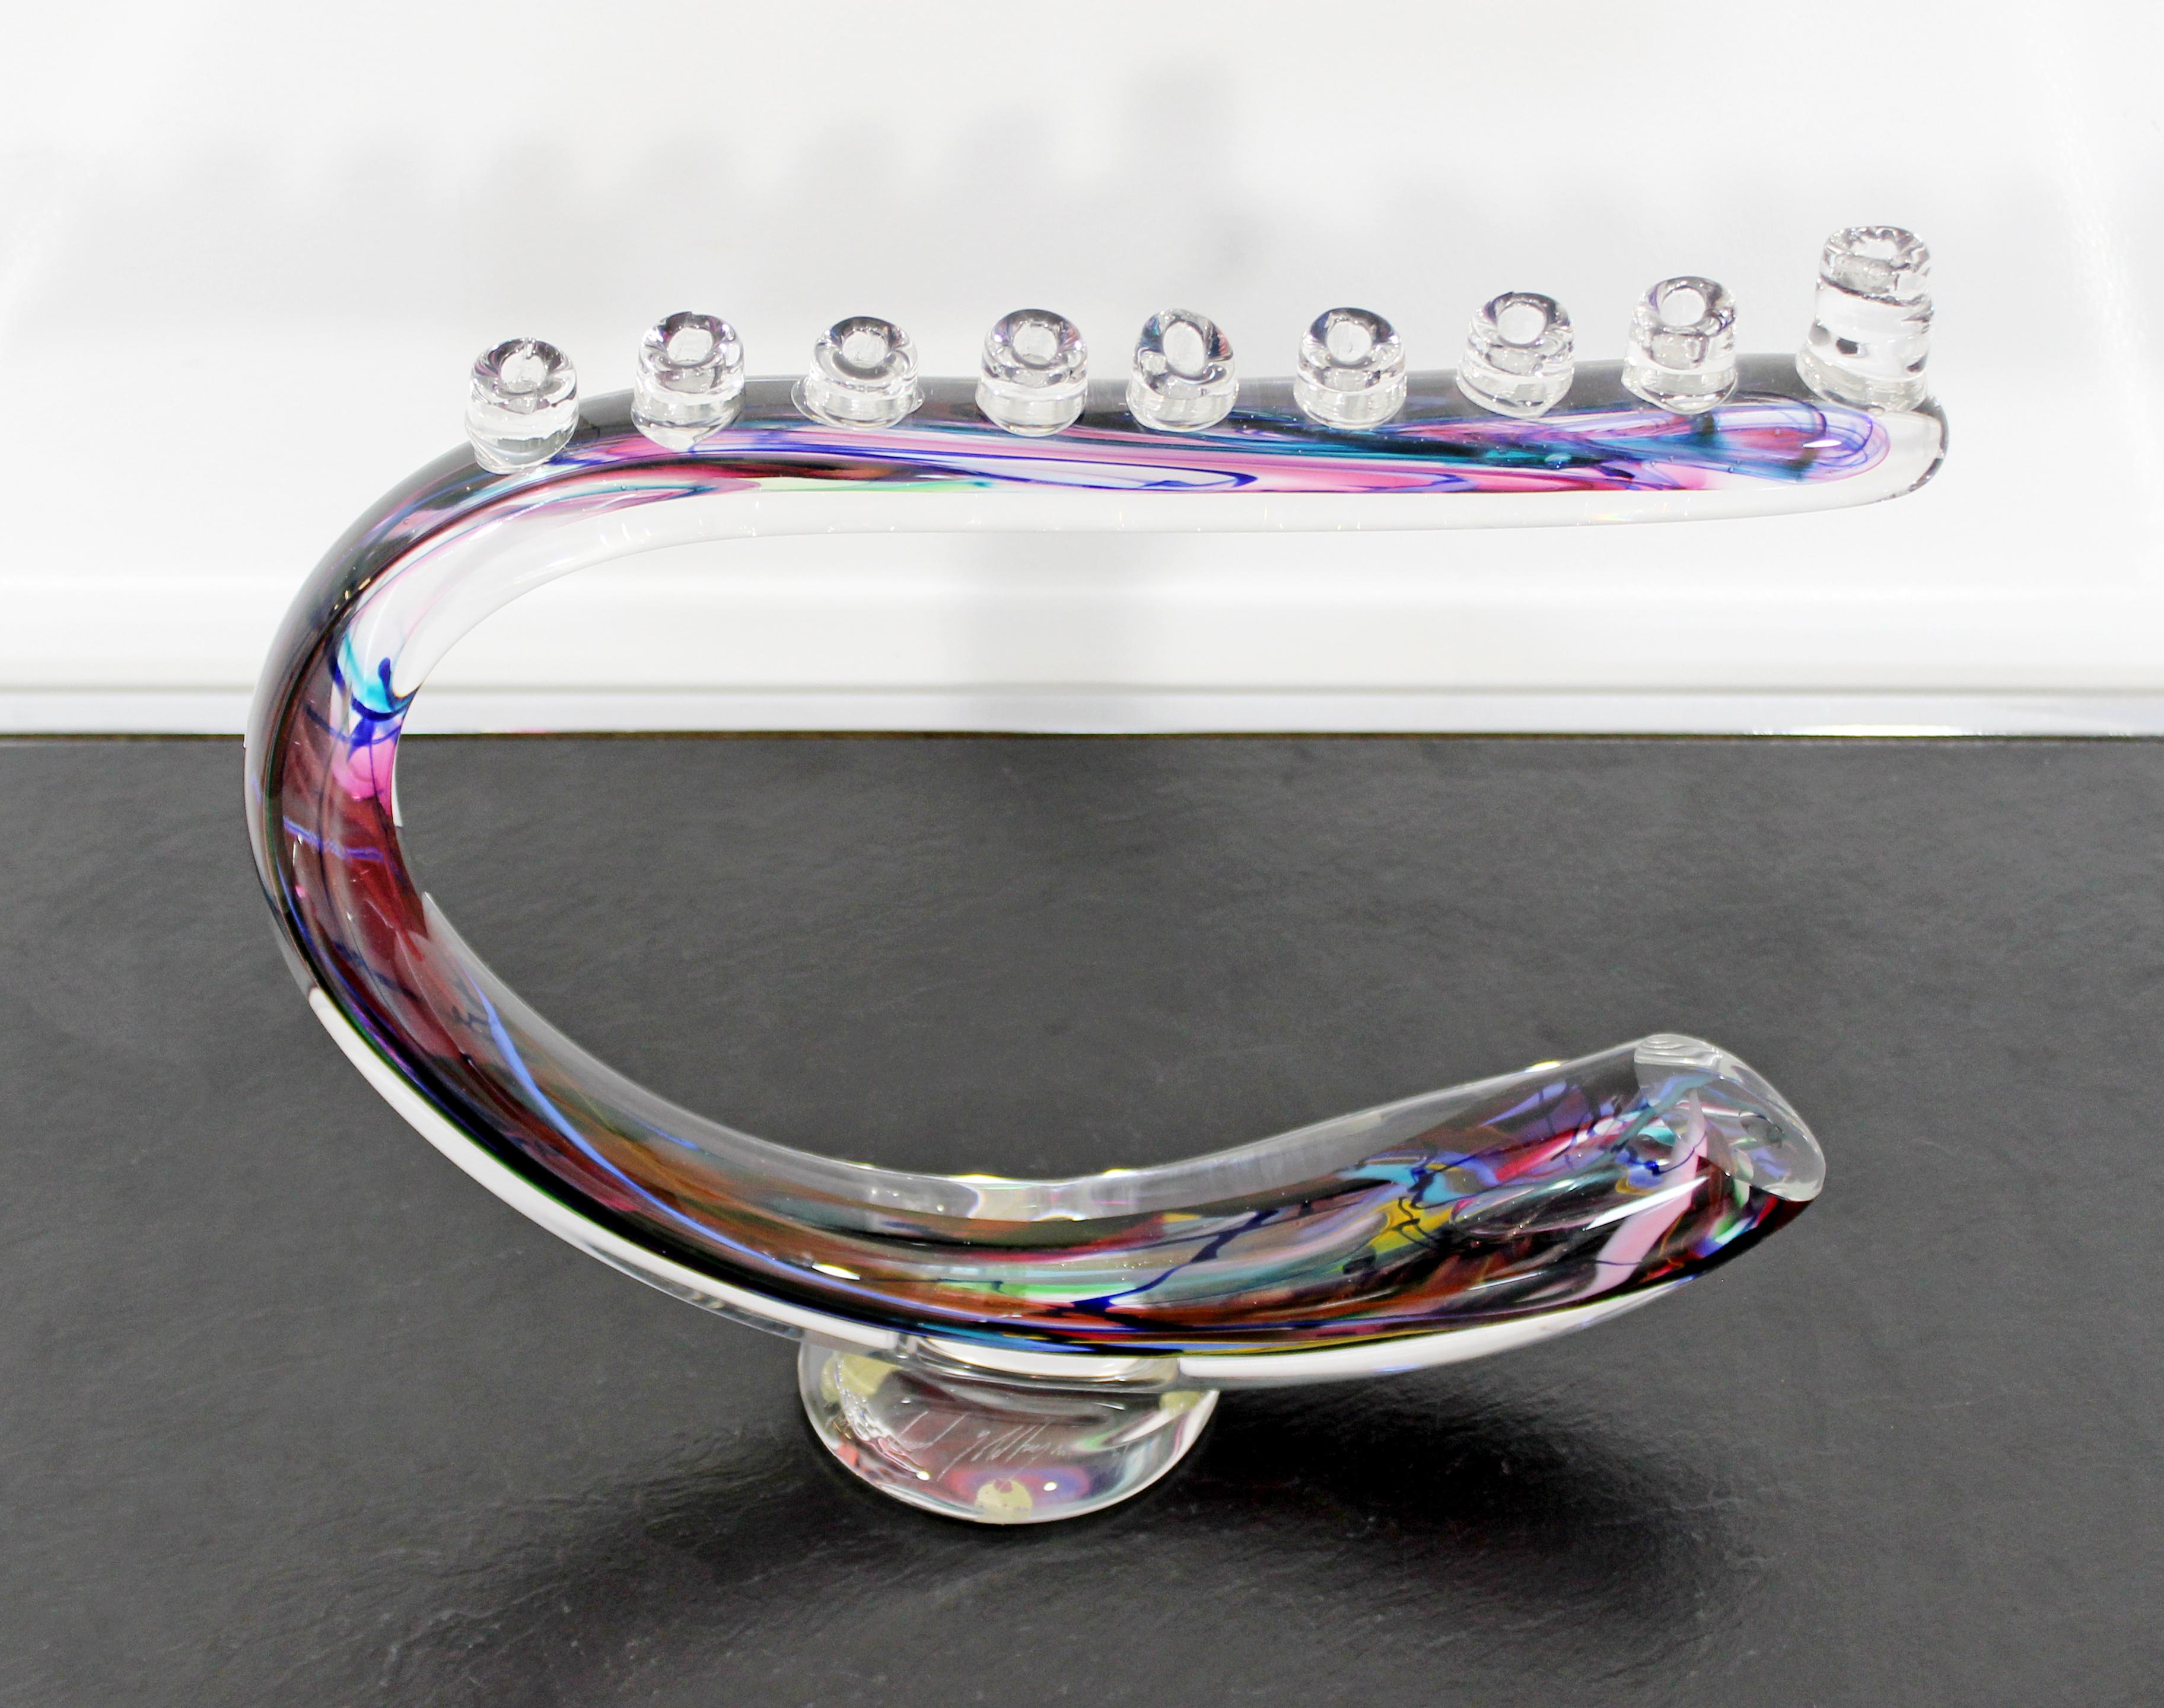 For your consideration is a magnificently beautiful, studio crafted art glass menorah, shaped like and entitled 